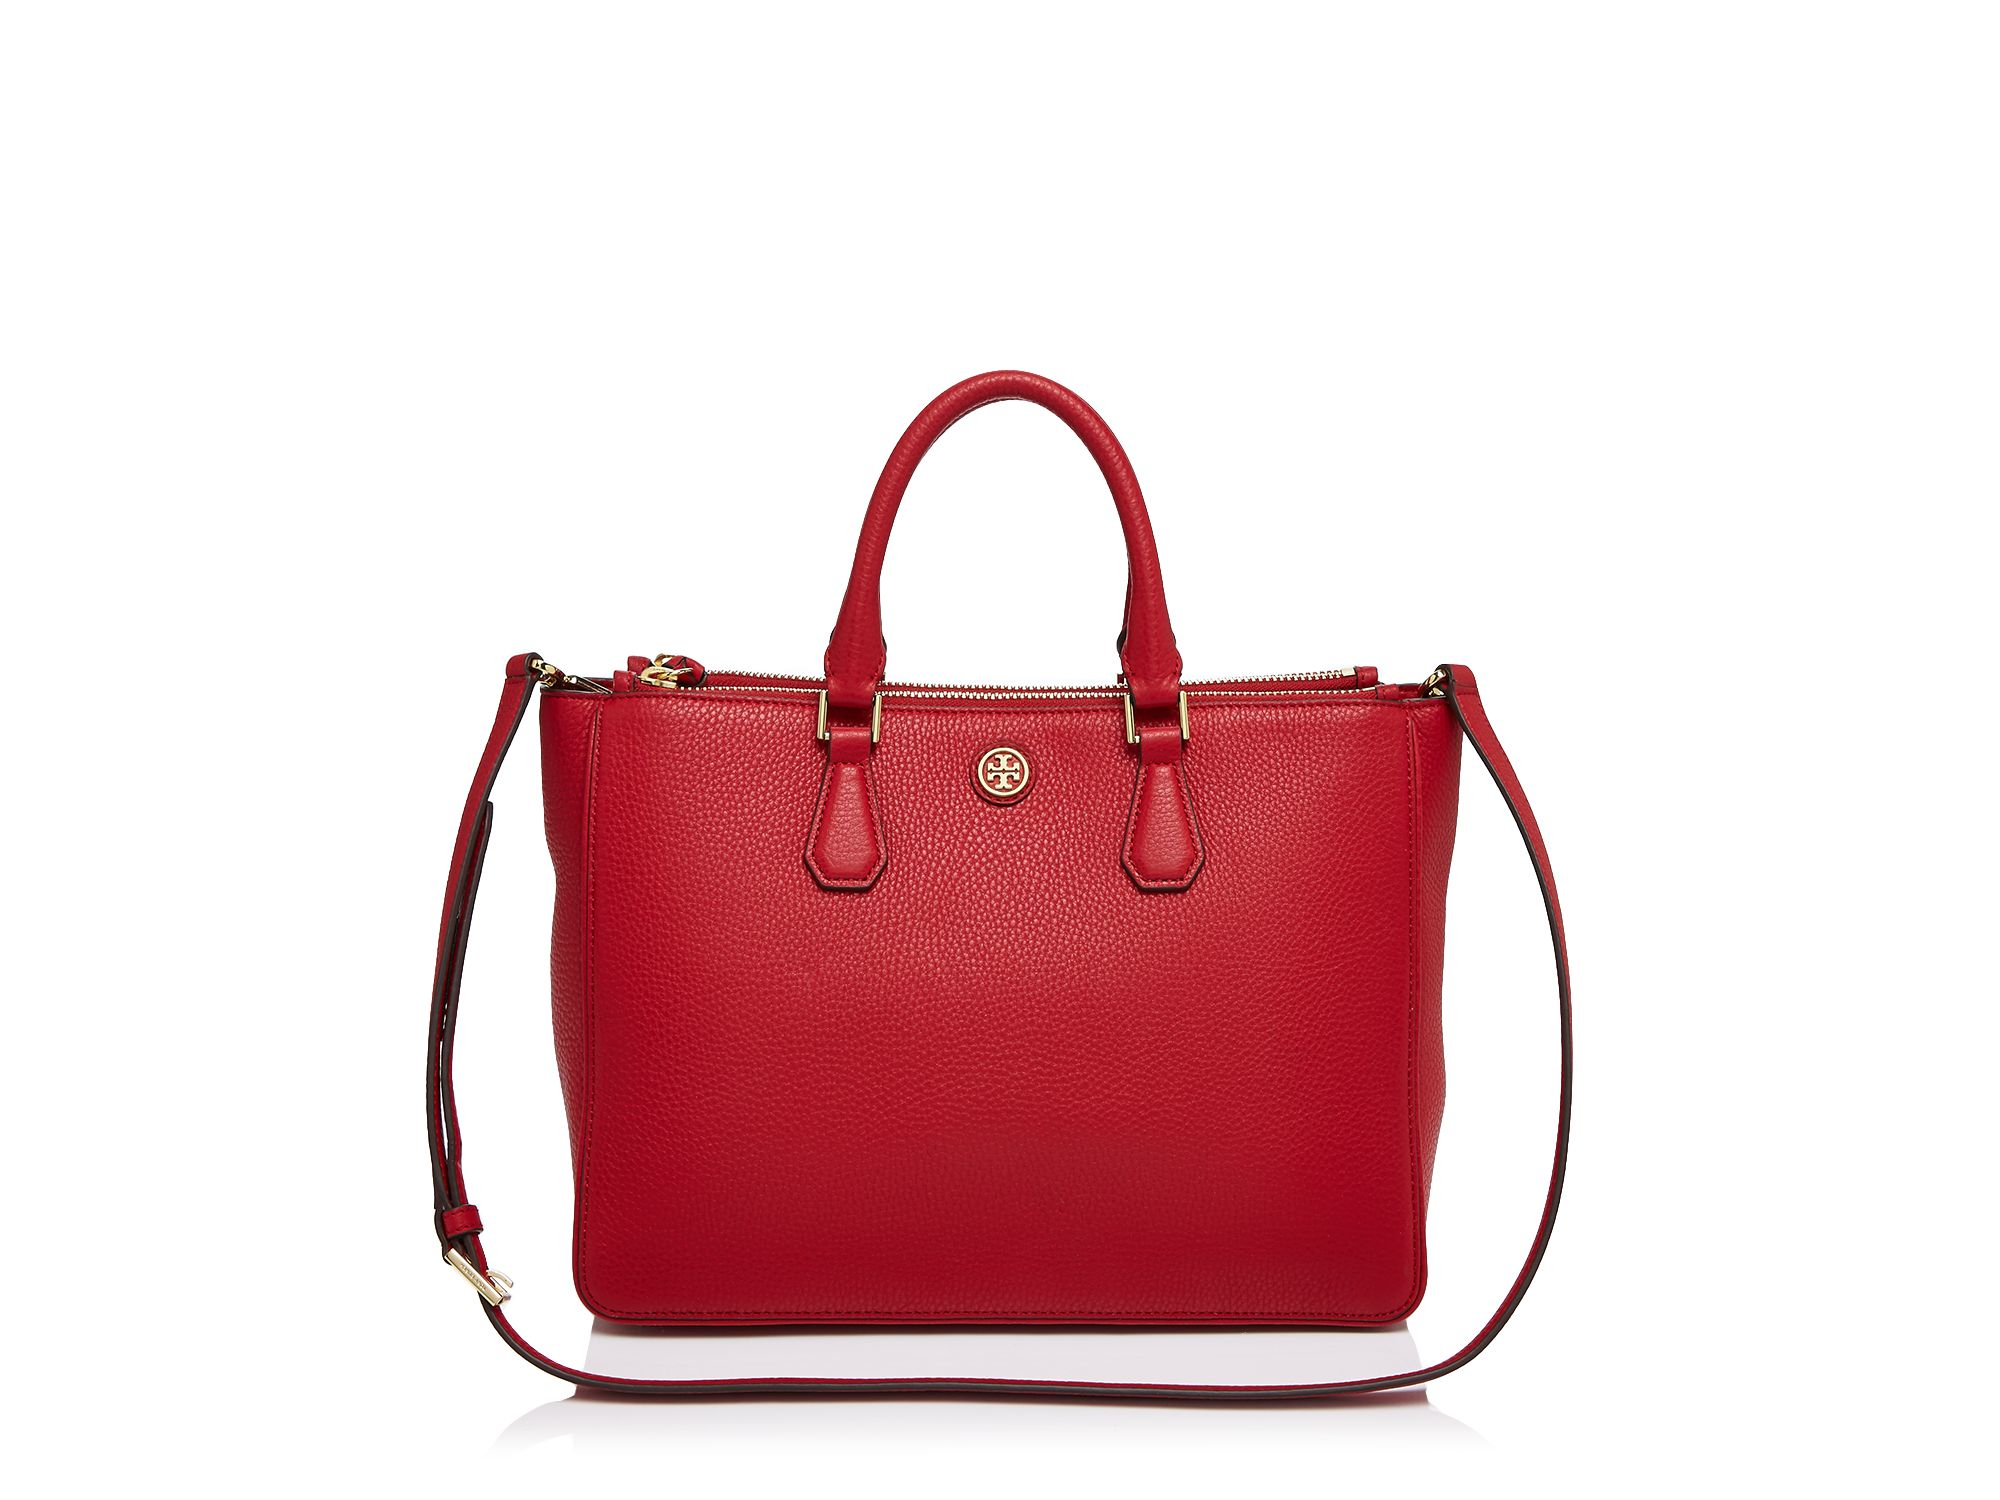 Tory Burch Robinson Pebbled Multi Tote in Red - Lyst